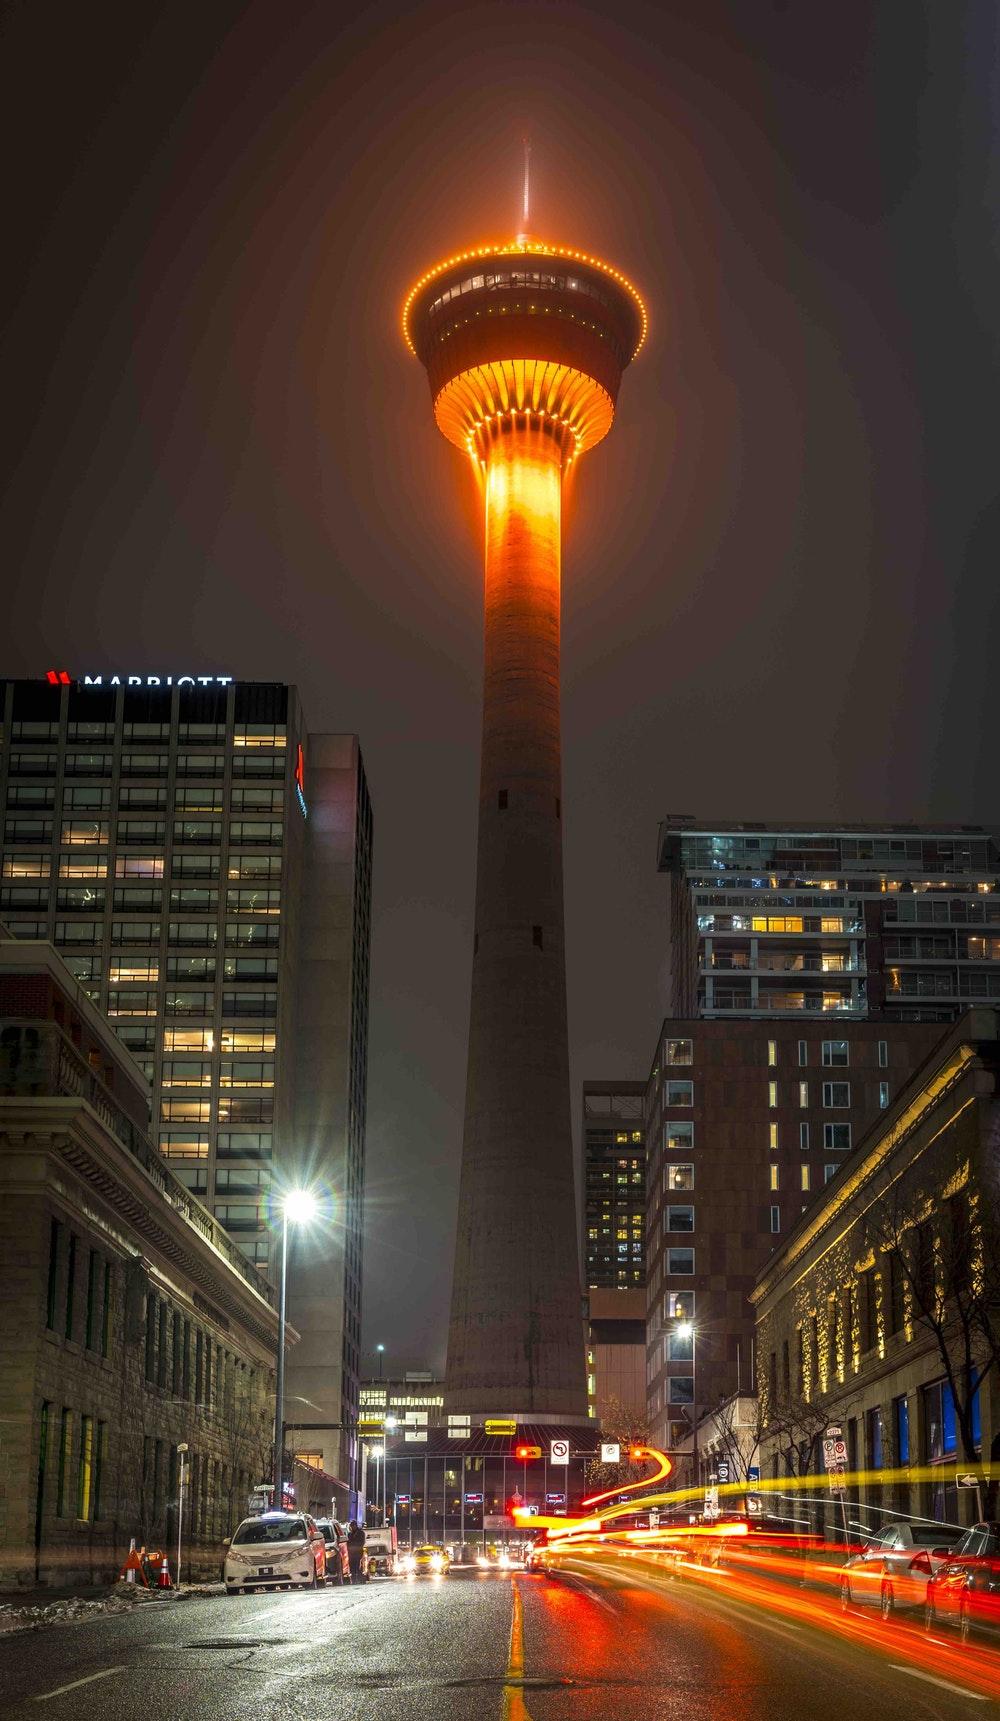 Calgary Picture. Download Free Image